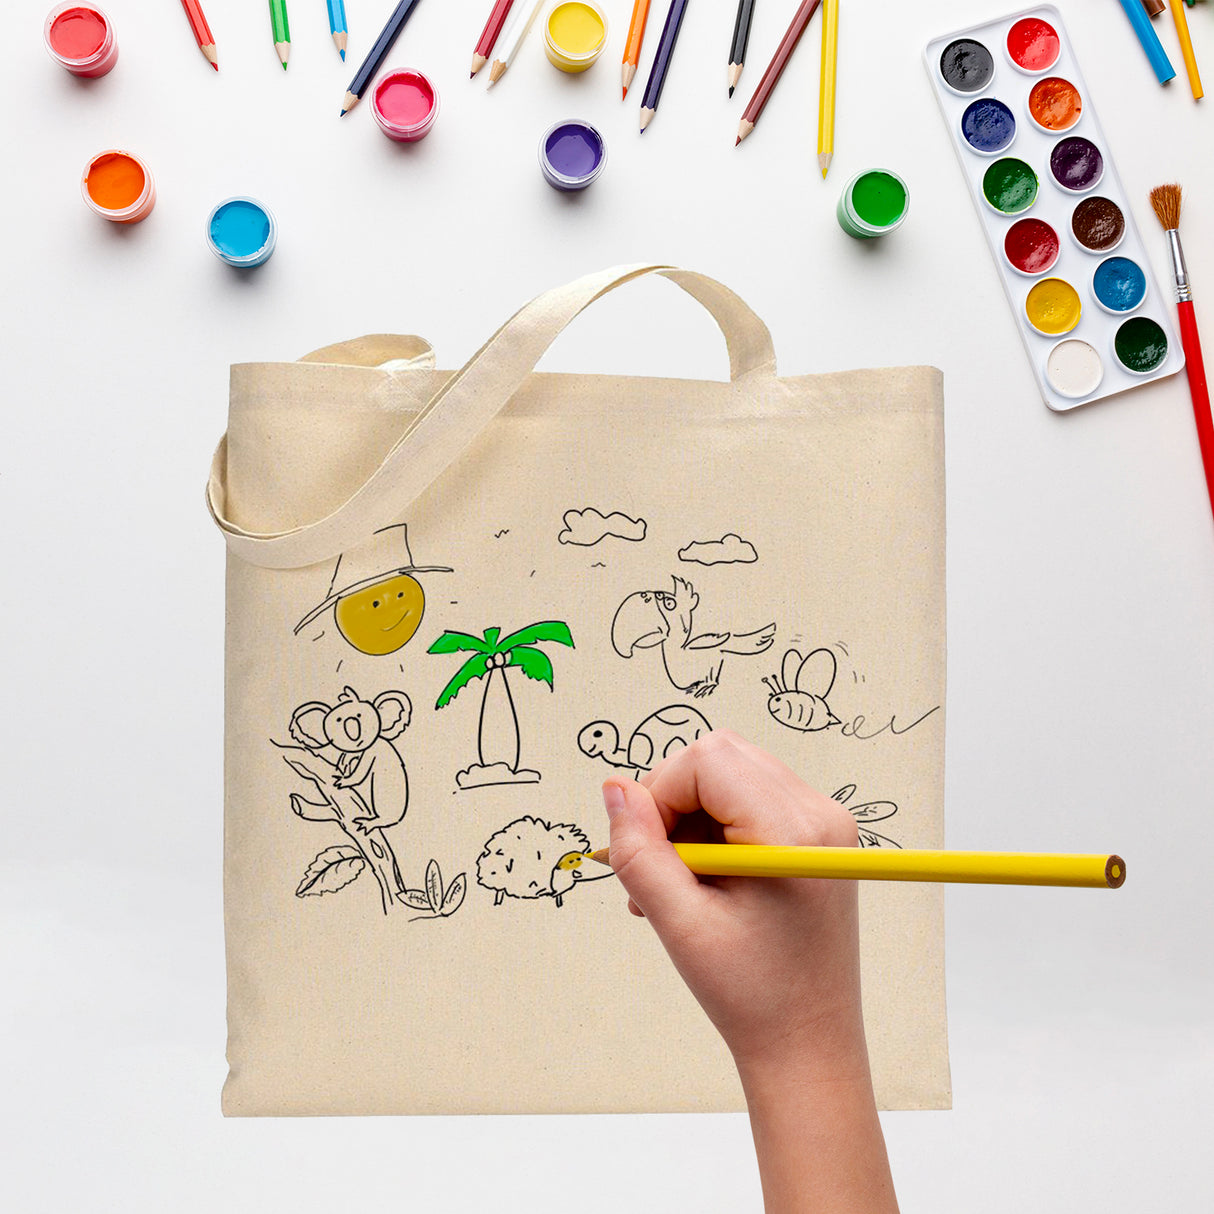 Black Color Tropical Tote Bag (Advance Level) - Coloring-Painting Bags for Kids